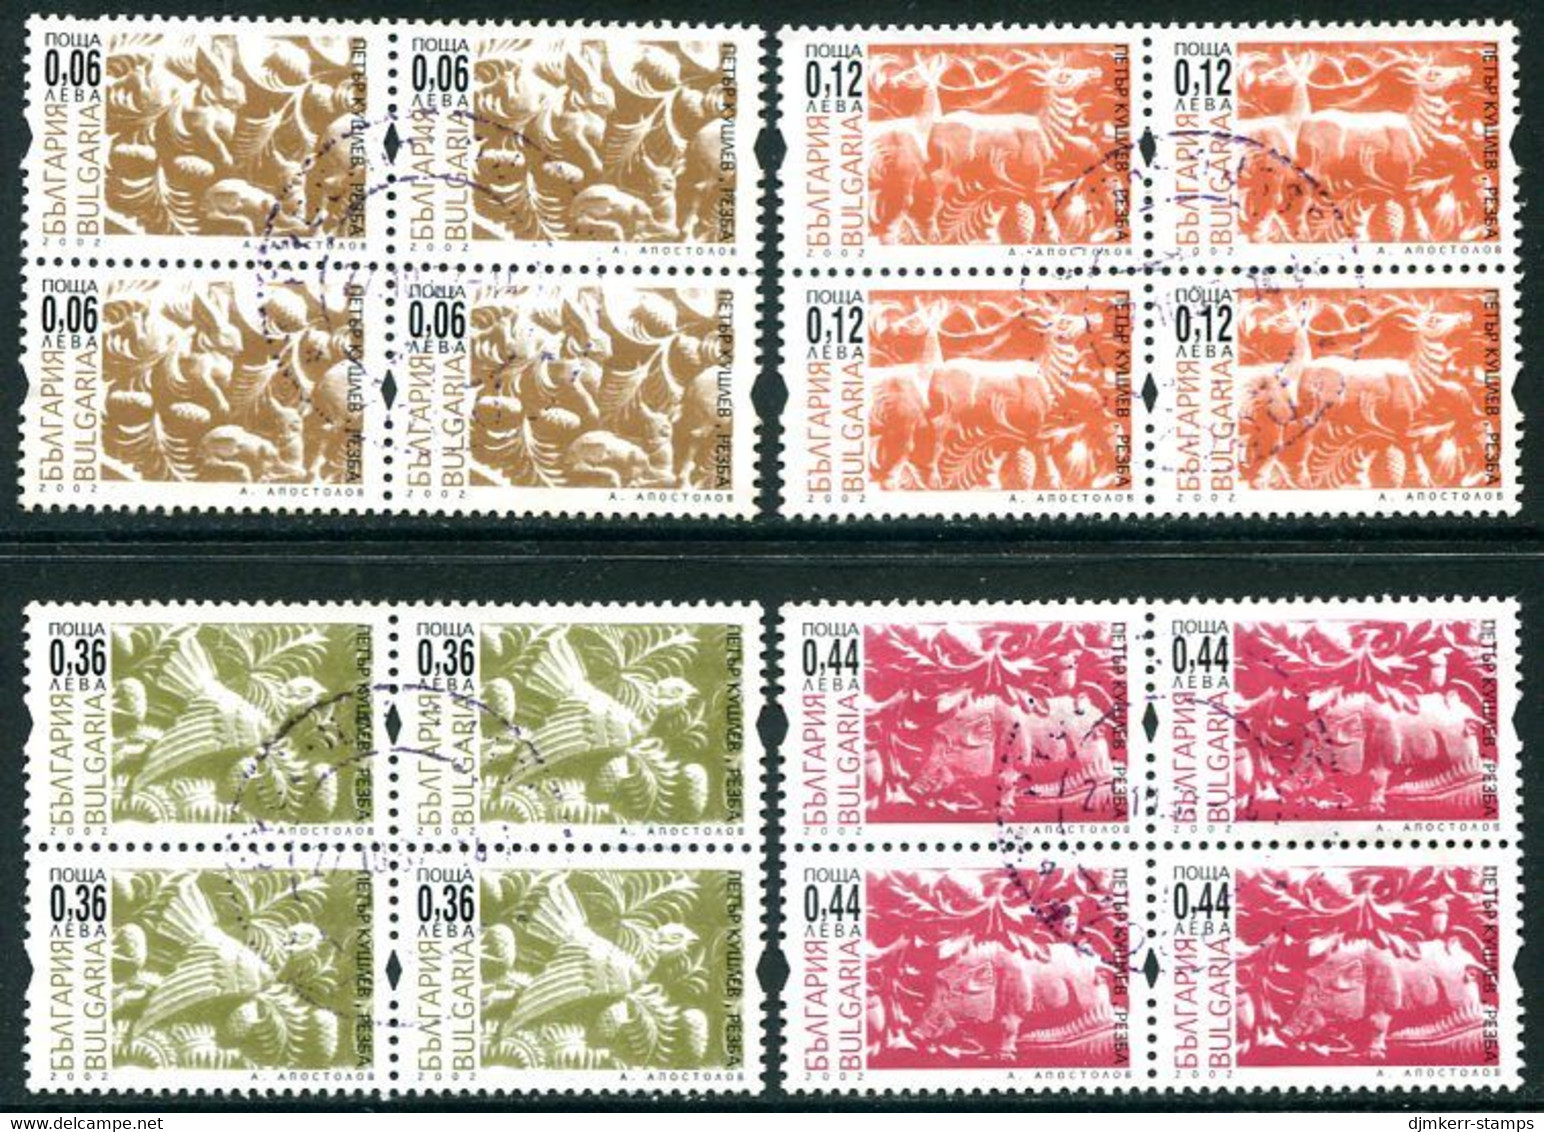 BULGARIA 2002 Kushlev Woodcuts With Security Perforation Used Blocks Of 4.  Michel 4571-74 CS X - Used Stamps